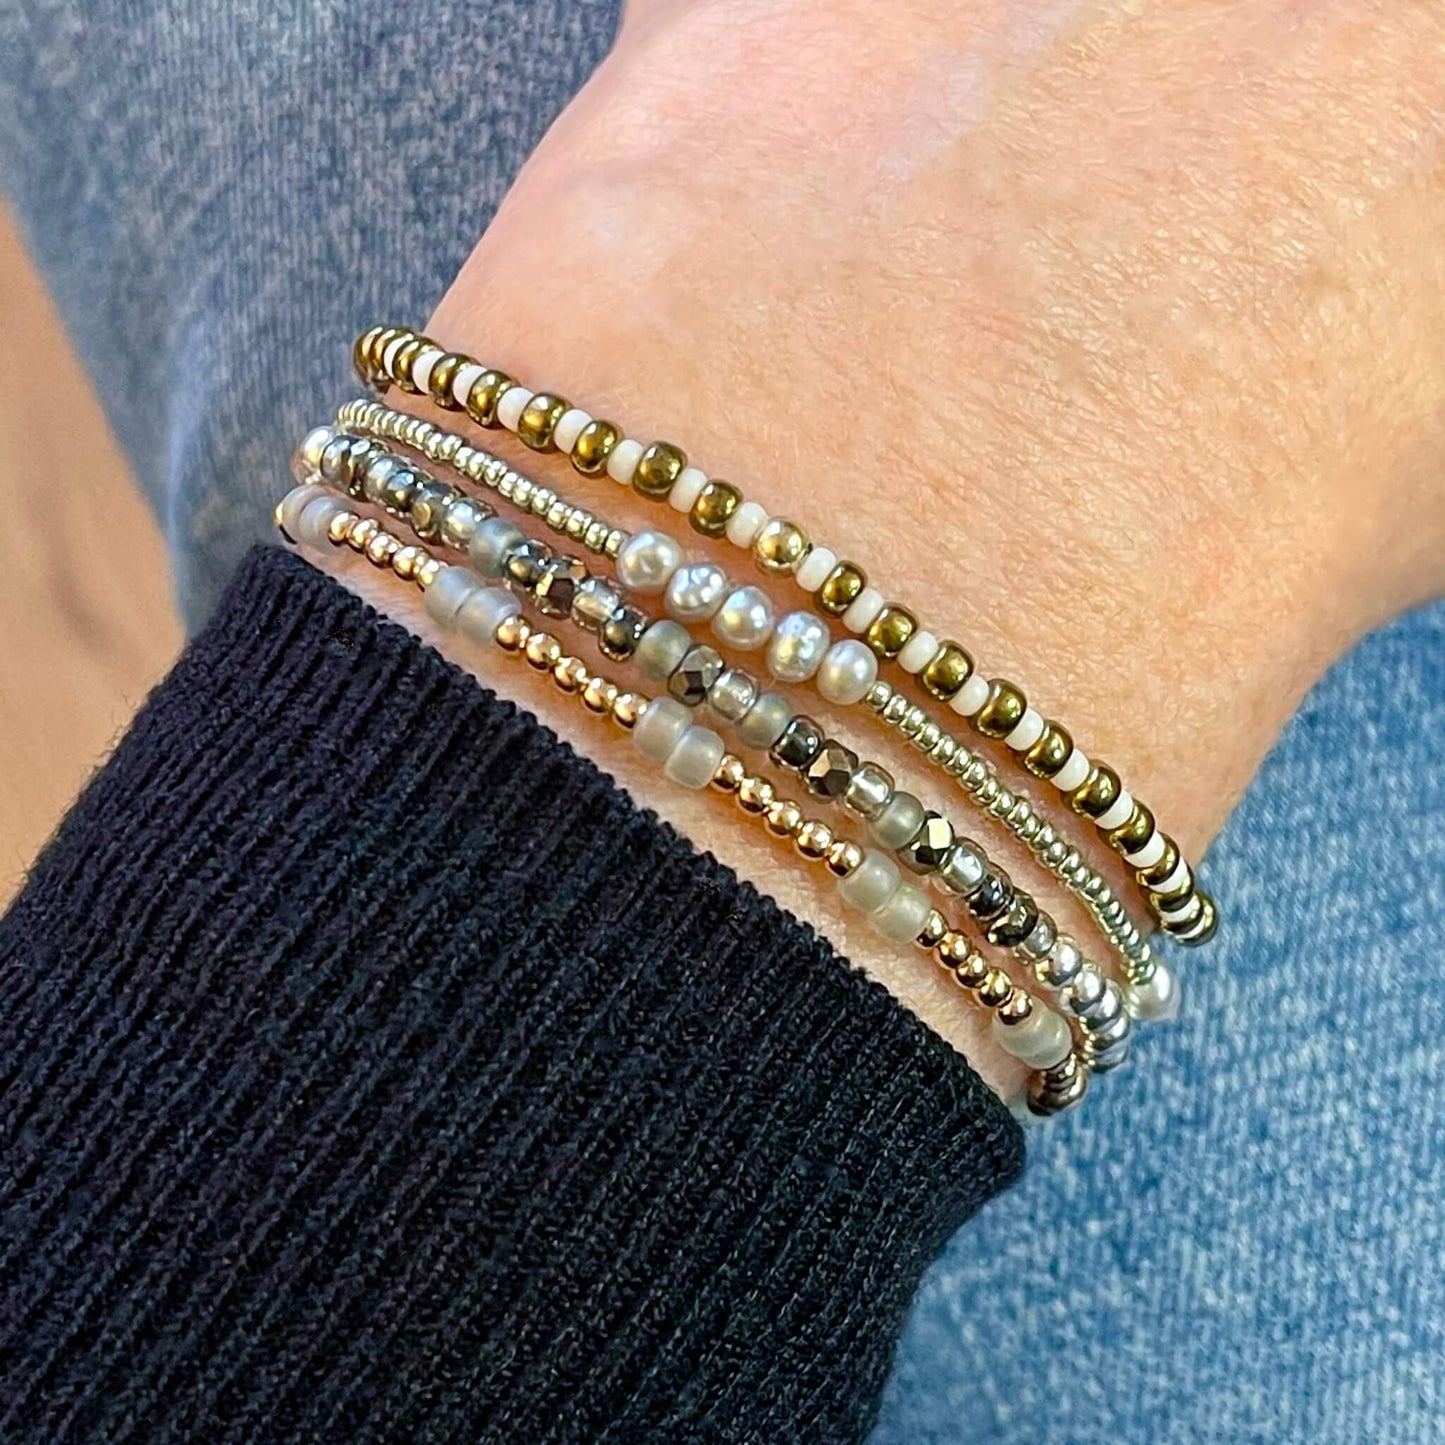 Dainty mixed metals beaded stretch bracelet stack of 4 with rose gold fill beads, freshwater pearls, and metal-tone glass seed beads.